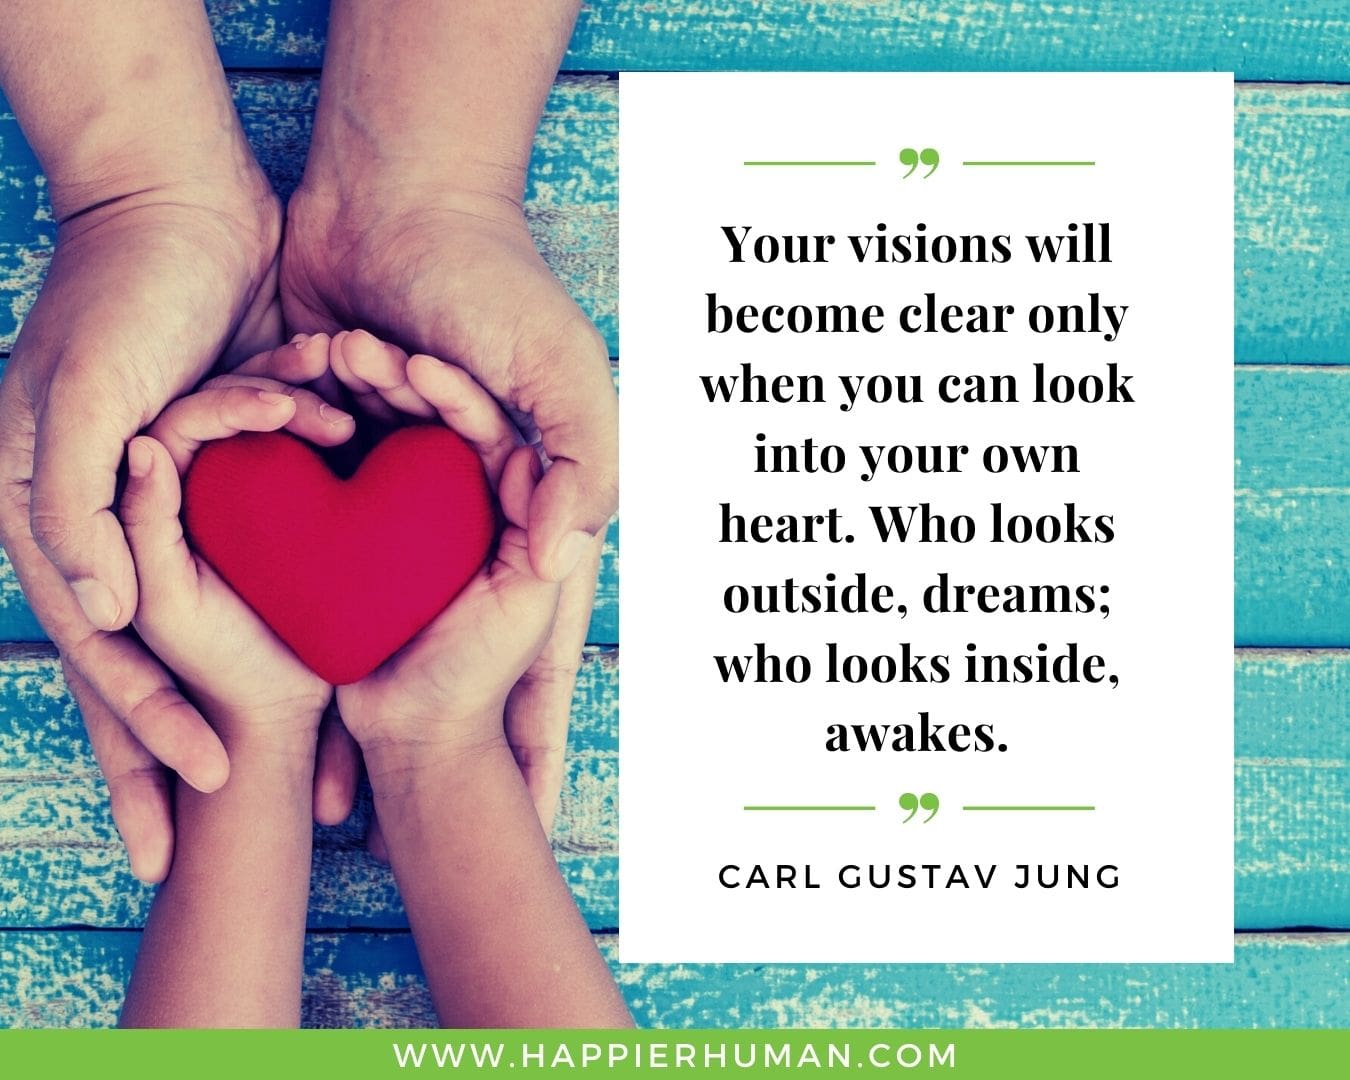 Introvert Quotes - “Your visions will become clear only when you can look into your own heart. Who looks outside, dreams; who looks inside, awakes.” – Carl Gustav Jung